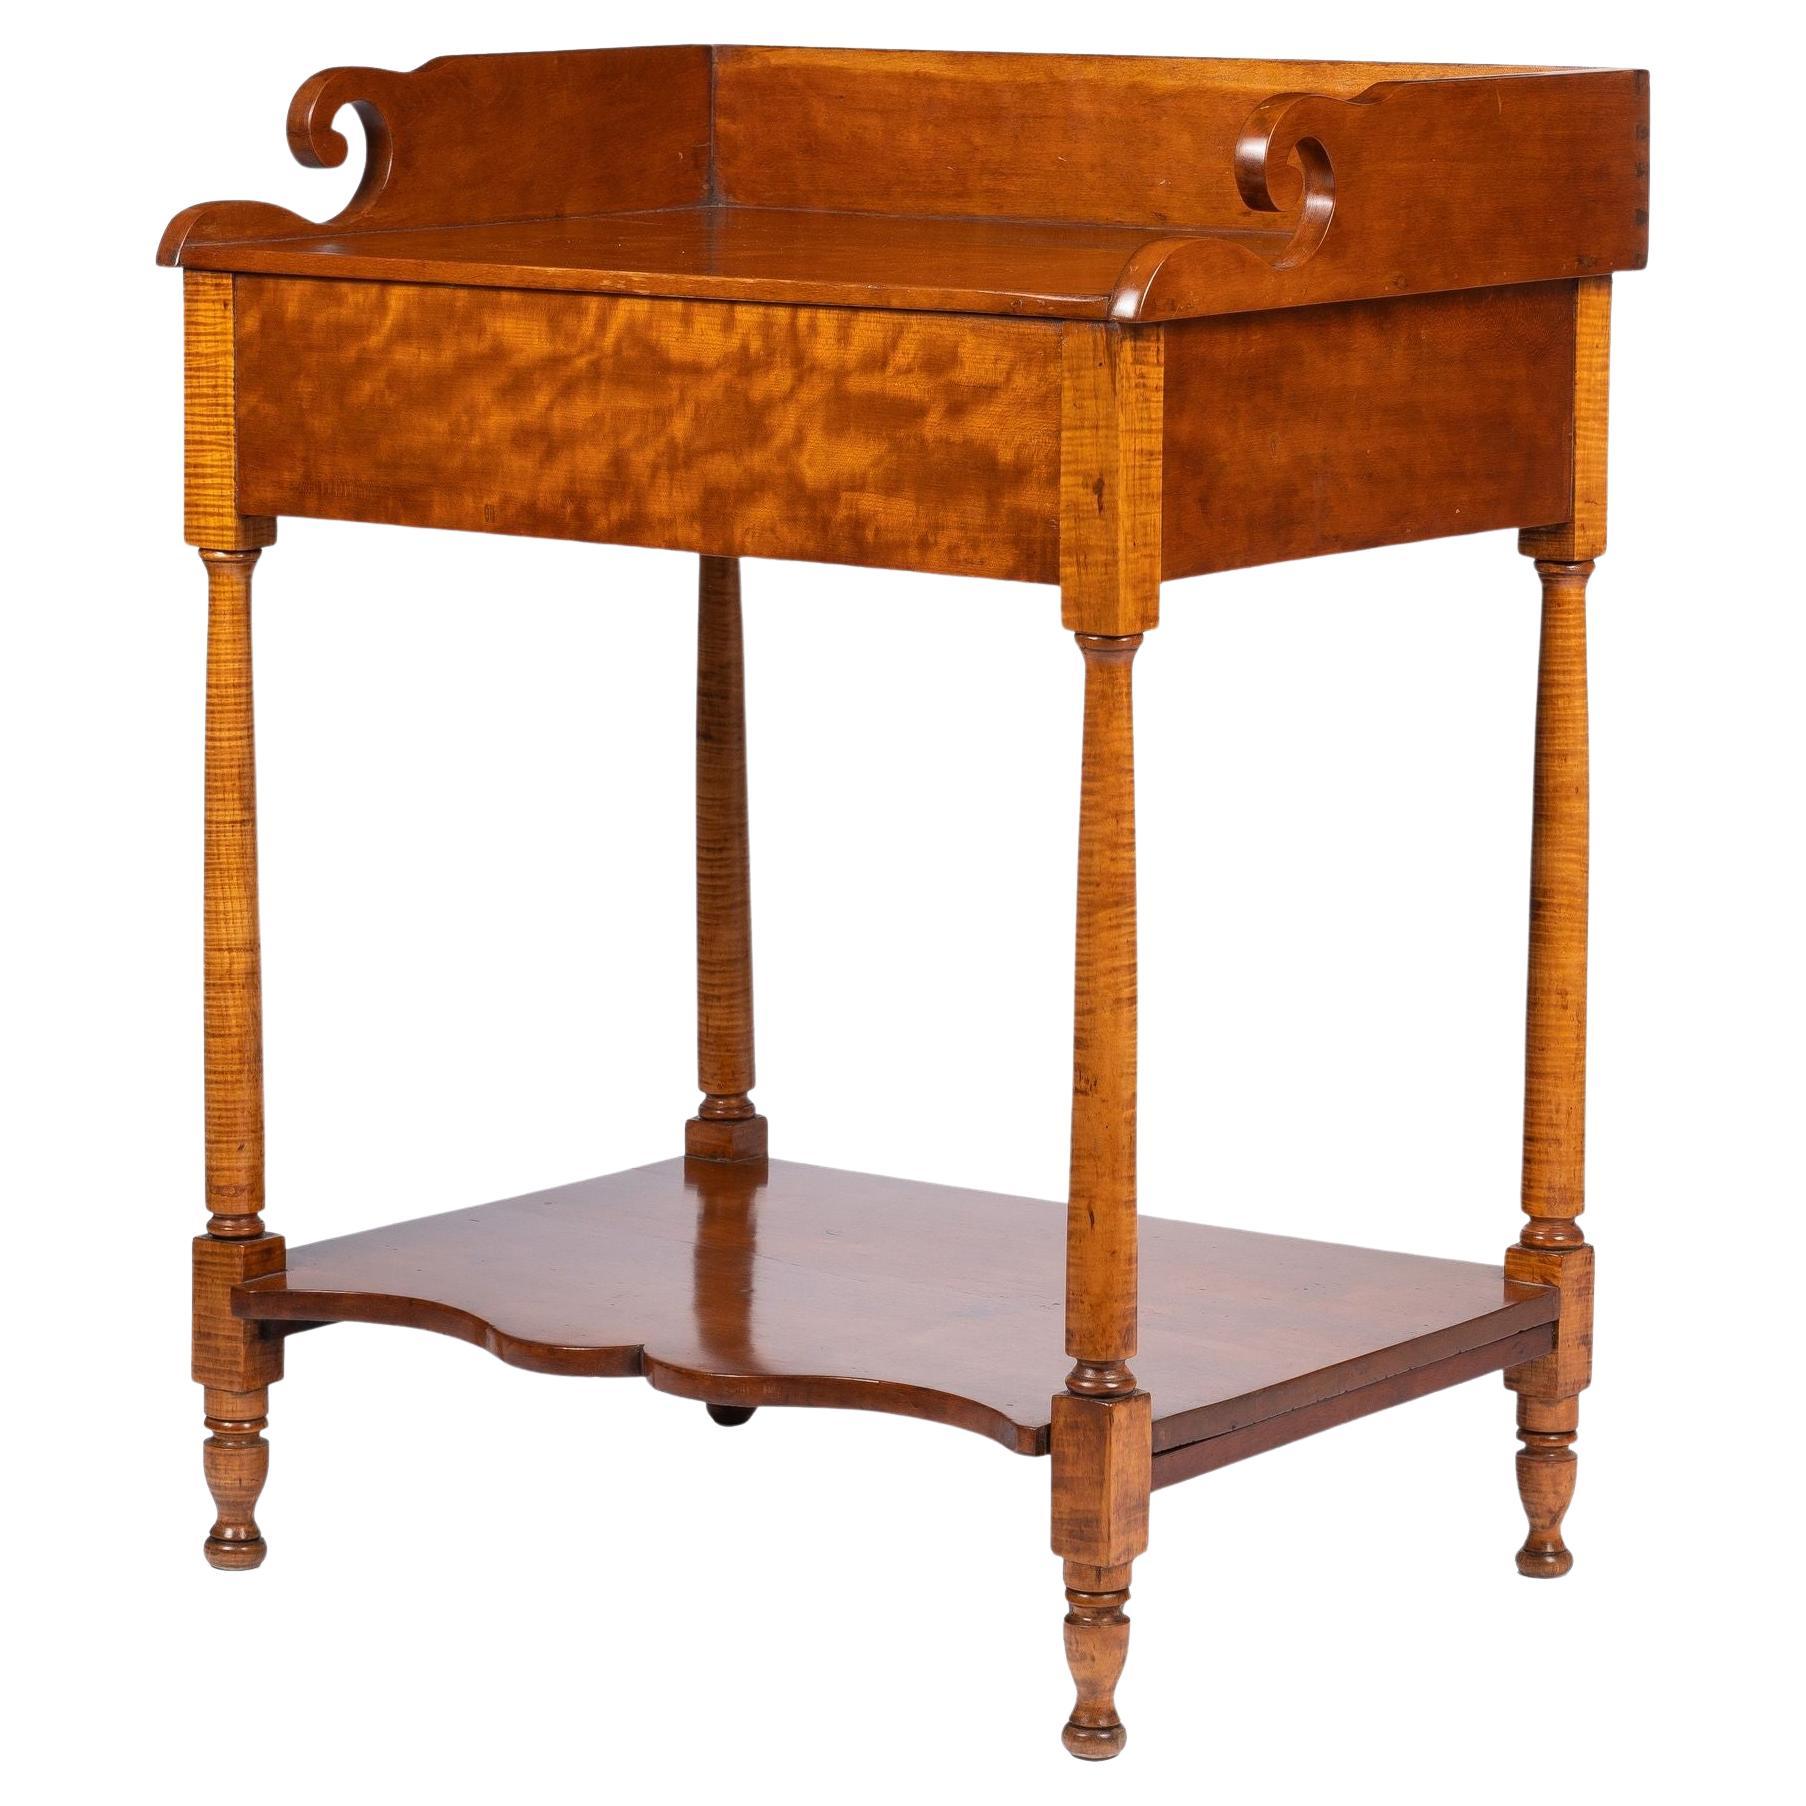 Philadelphia Cherry Wood Stand with Splash on a Conforming Apron, 1820 For Sale